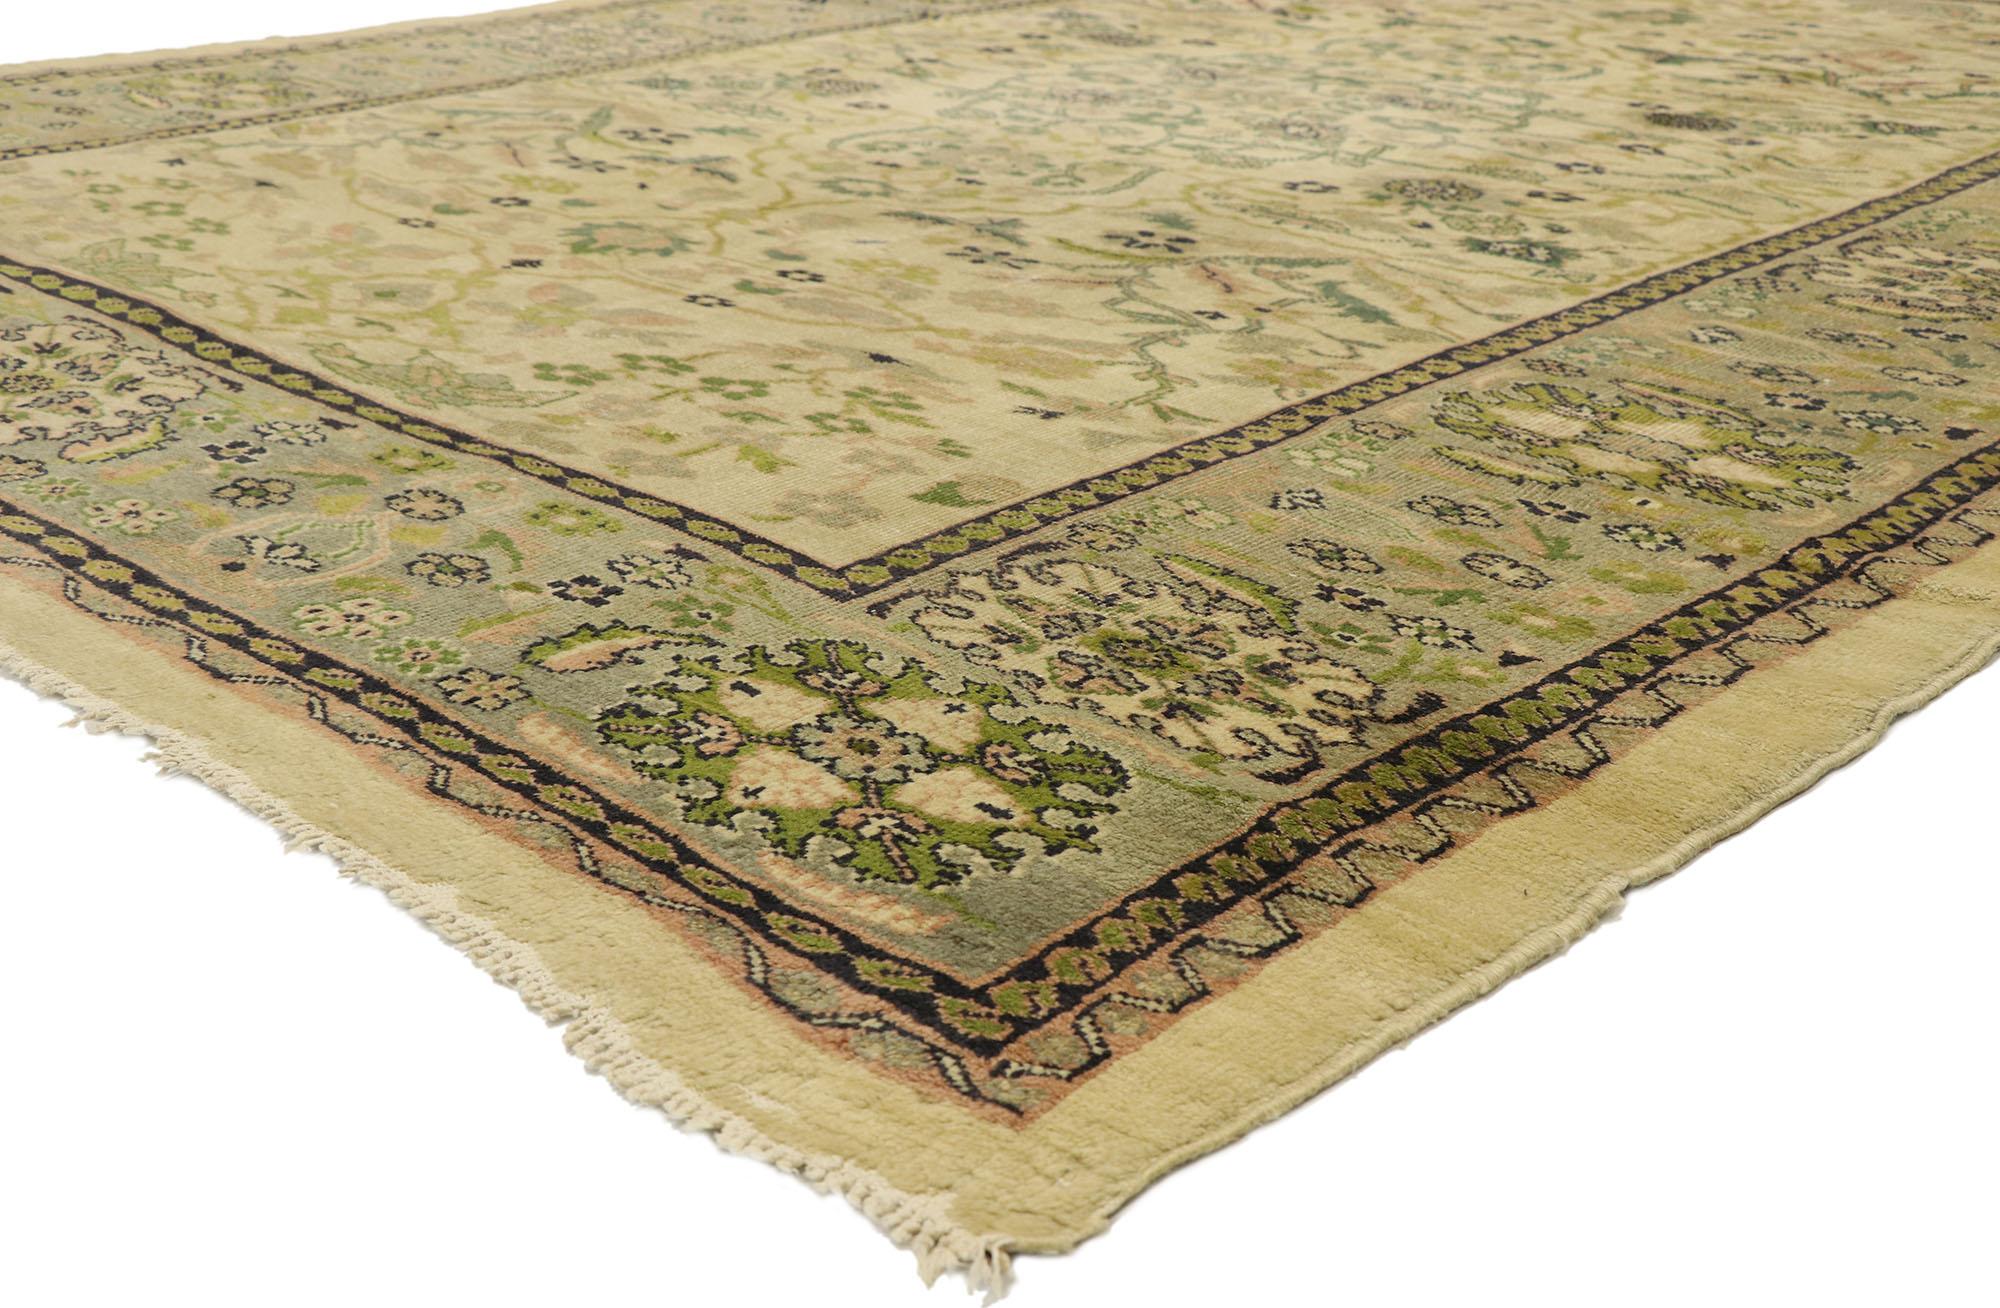 76767 Antique Persian Sultanabad Rug, 09'00 x 12'00. A Persian Sultanabad rug originates from the Sultanabad region in Iran and is renowned for its quality craftsmanship, durability, and distinctive designs. These handwoven carpets typically feature